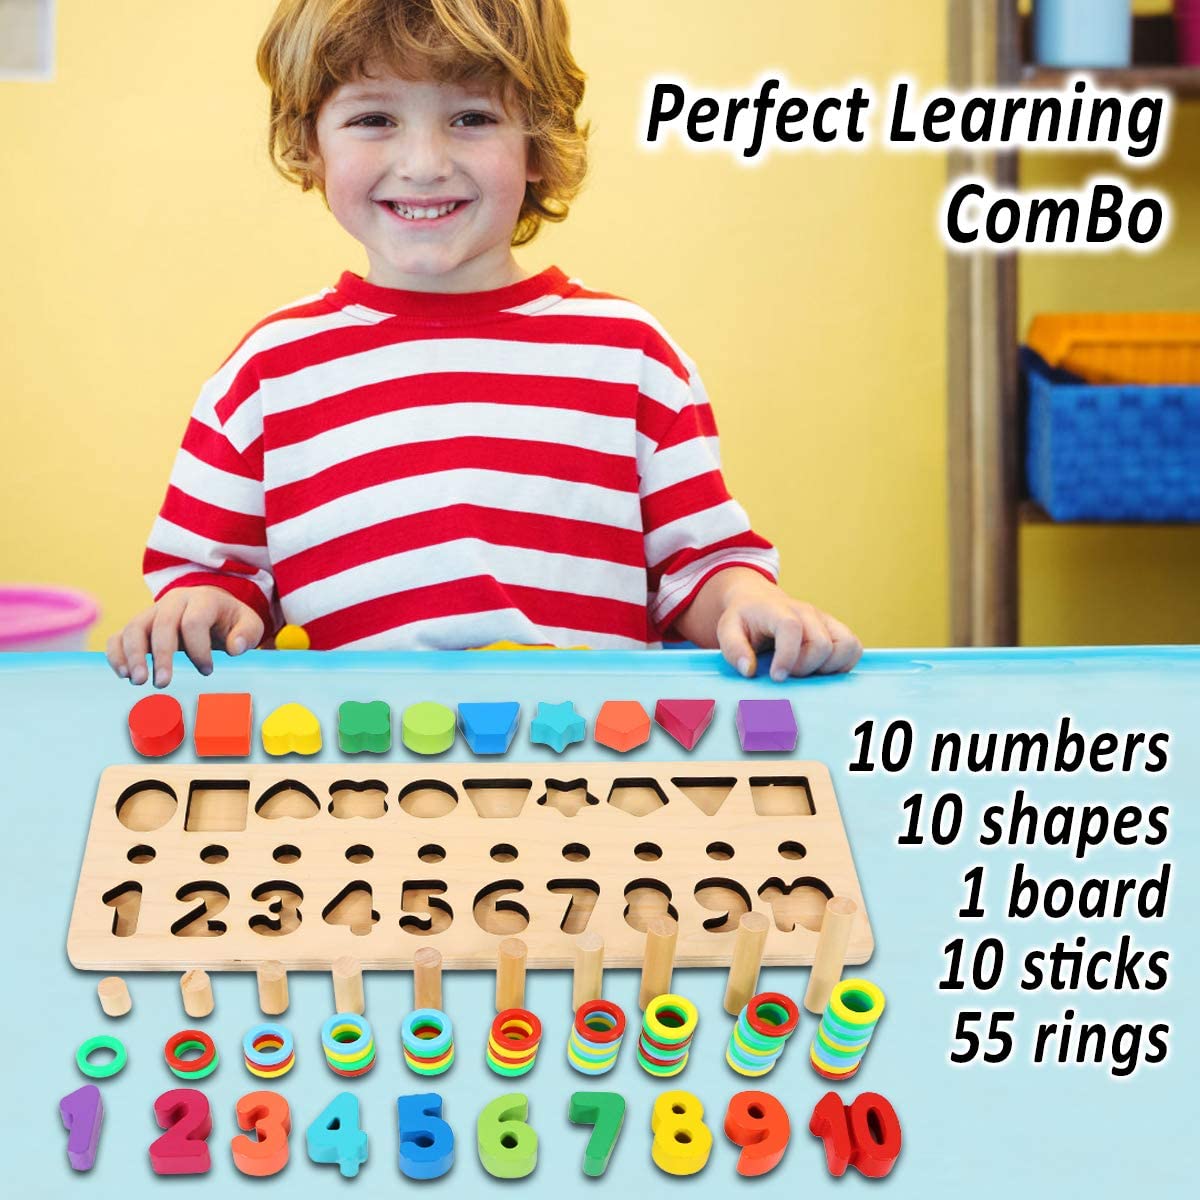 Toddlers - Shape Sorter Counting Game for Wooden Number Puzzle Sorting Montessori Toys for Age 3 4 5 Year olds Kids - Preschool Education Math Stacking Block Learning Wood Chunky Jigsaw - image 3 of 6